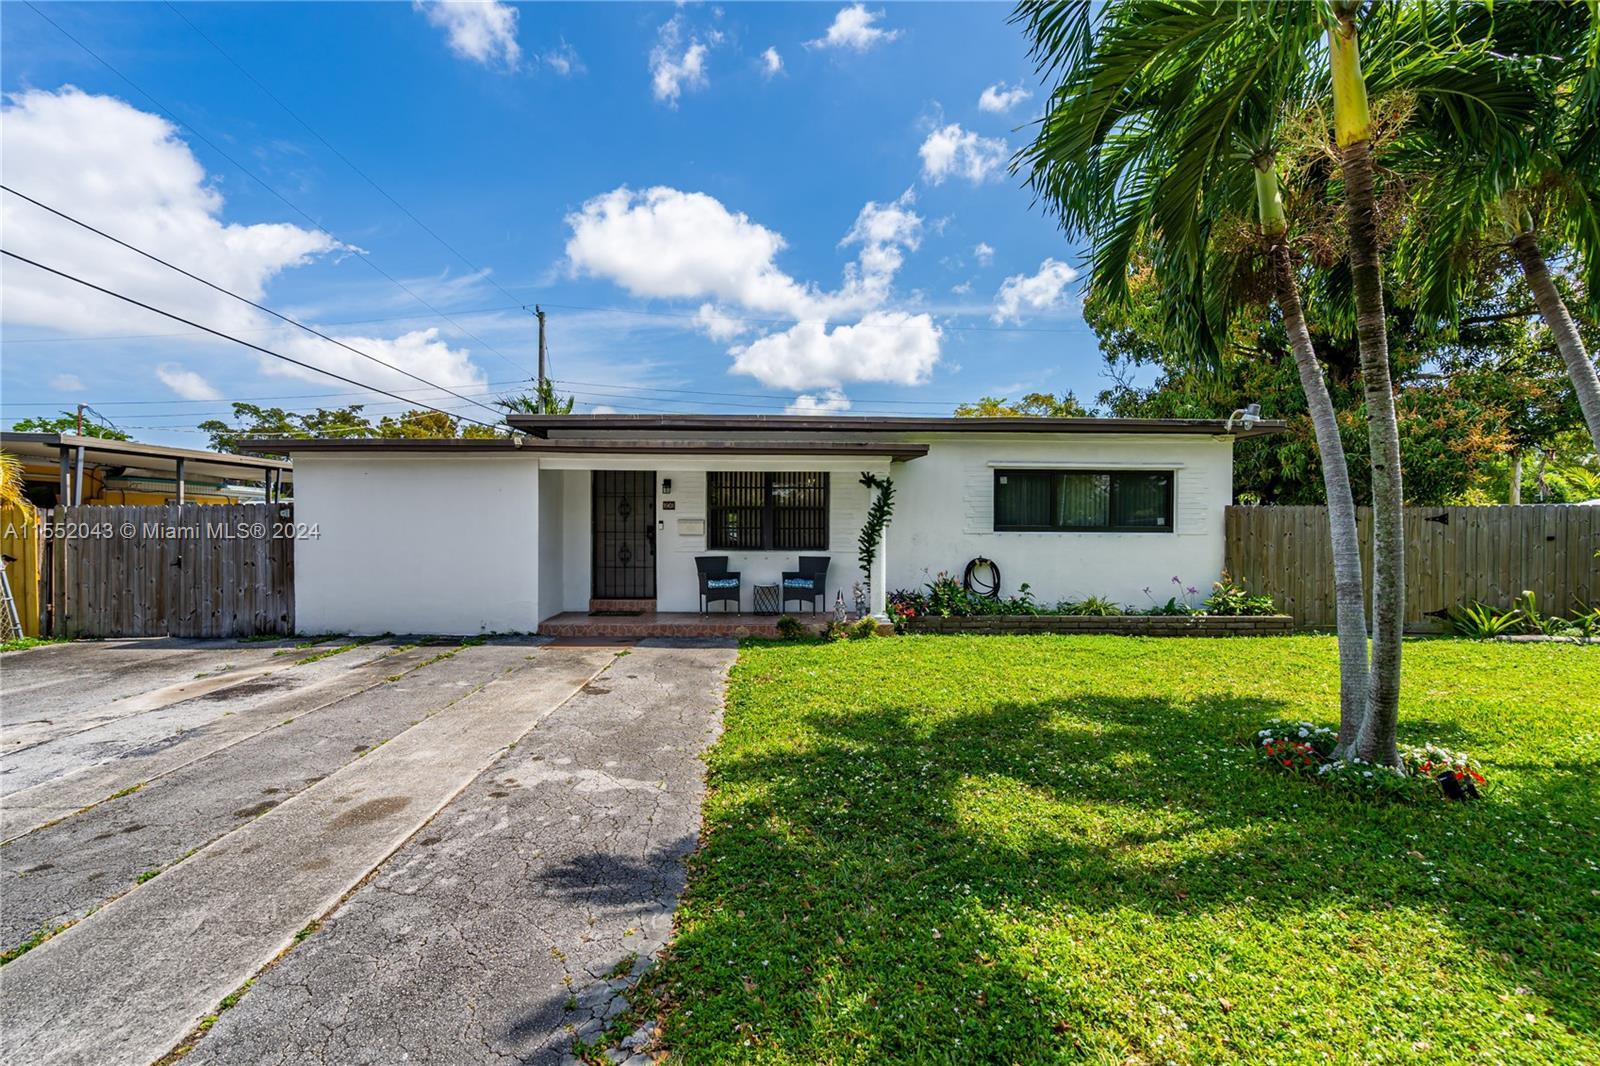 Photo of 1901 SW 63rd Ct in West Miami, FL